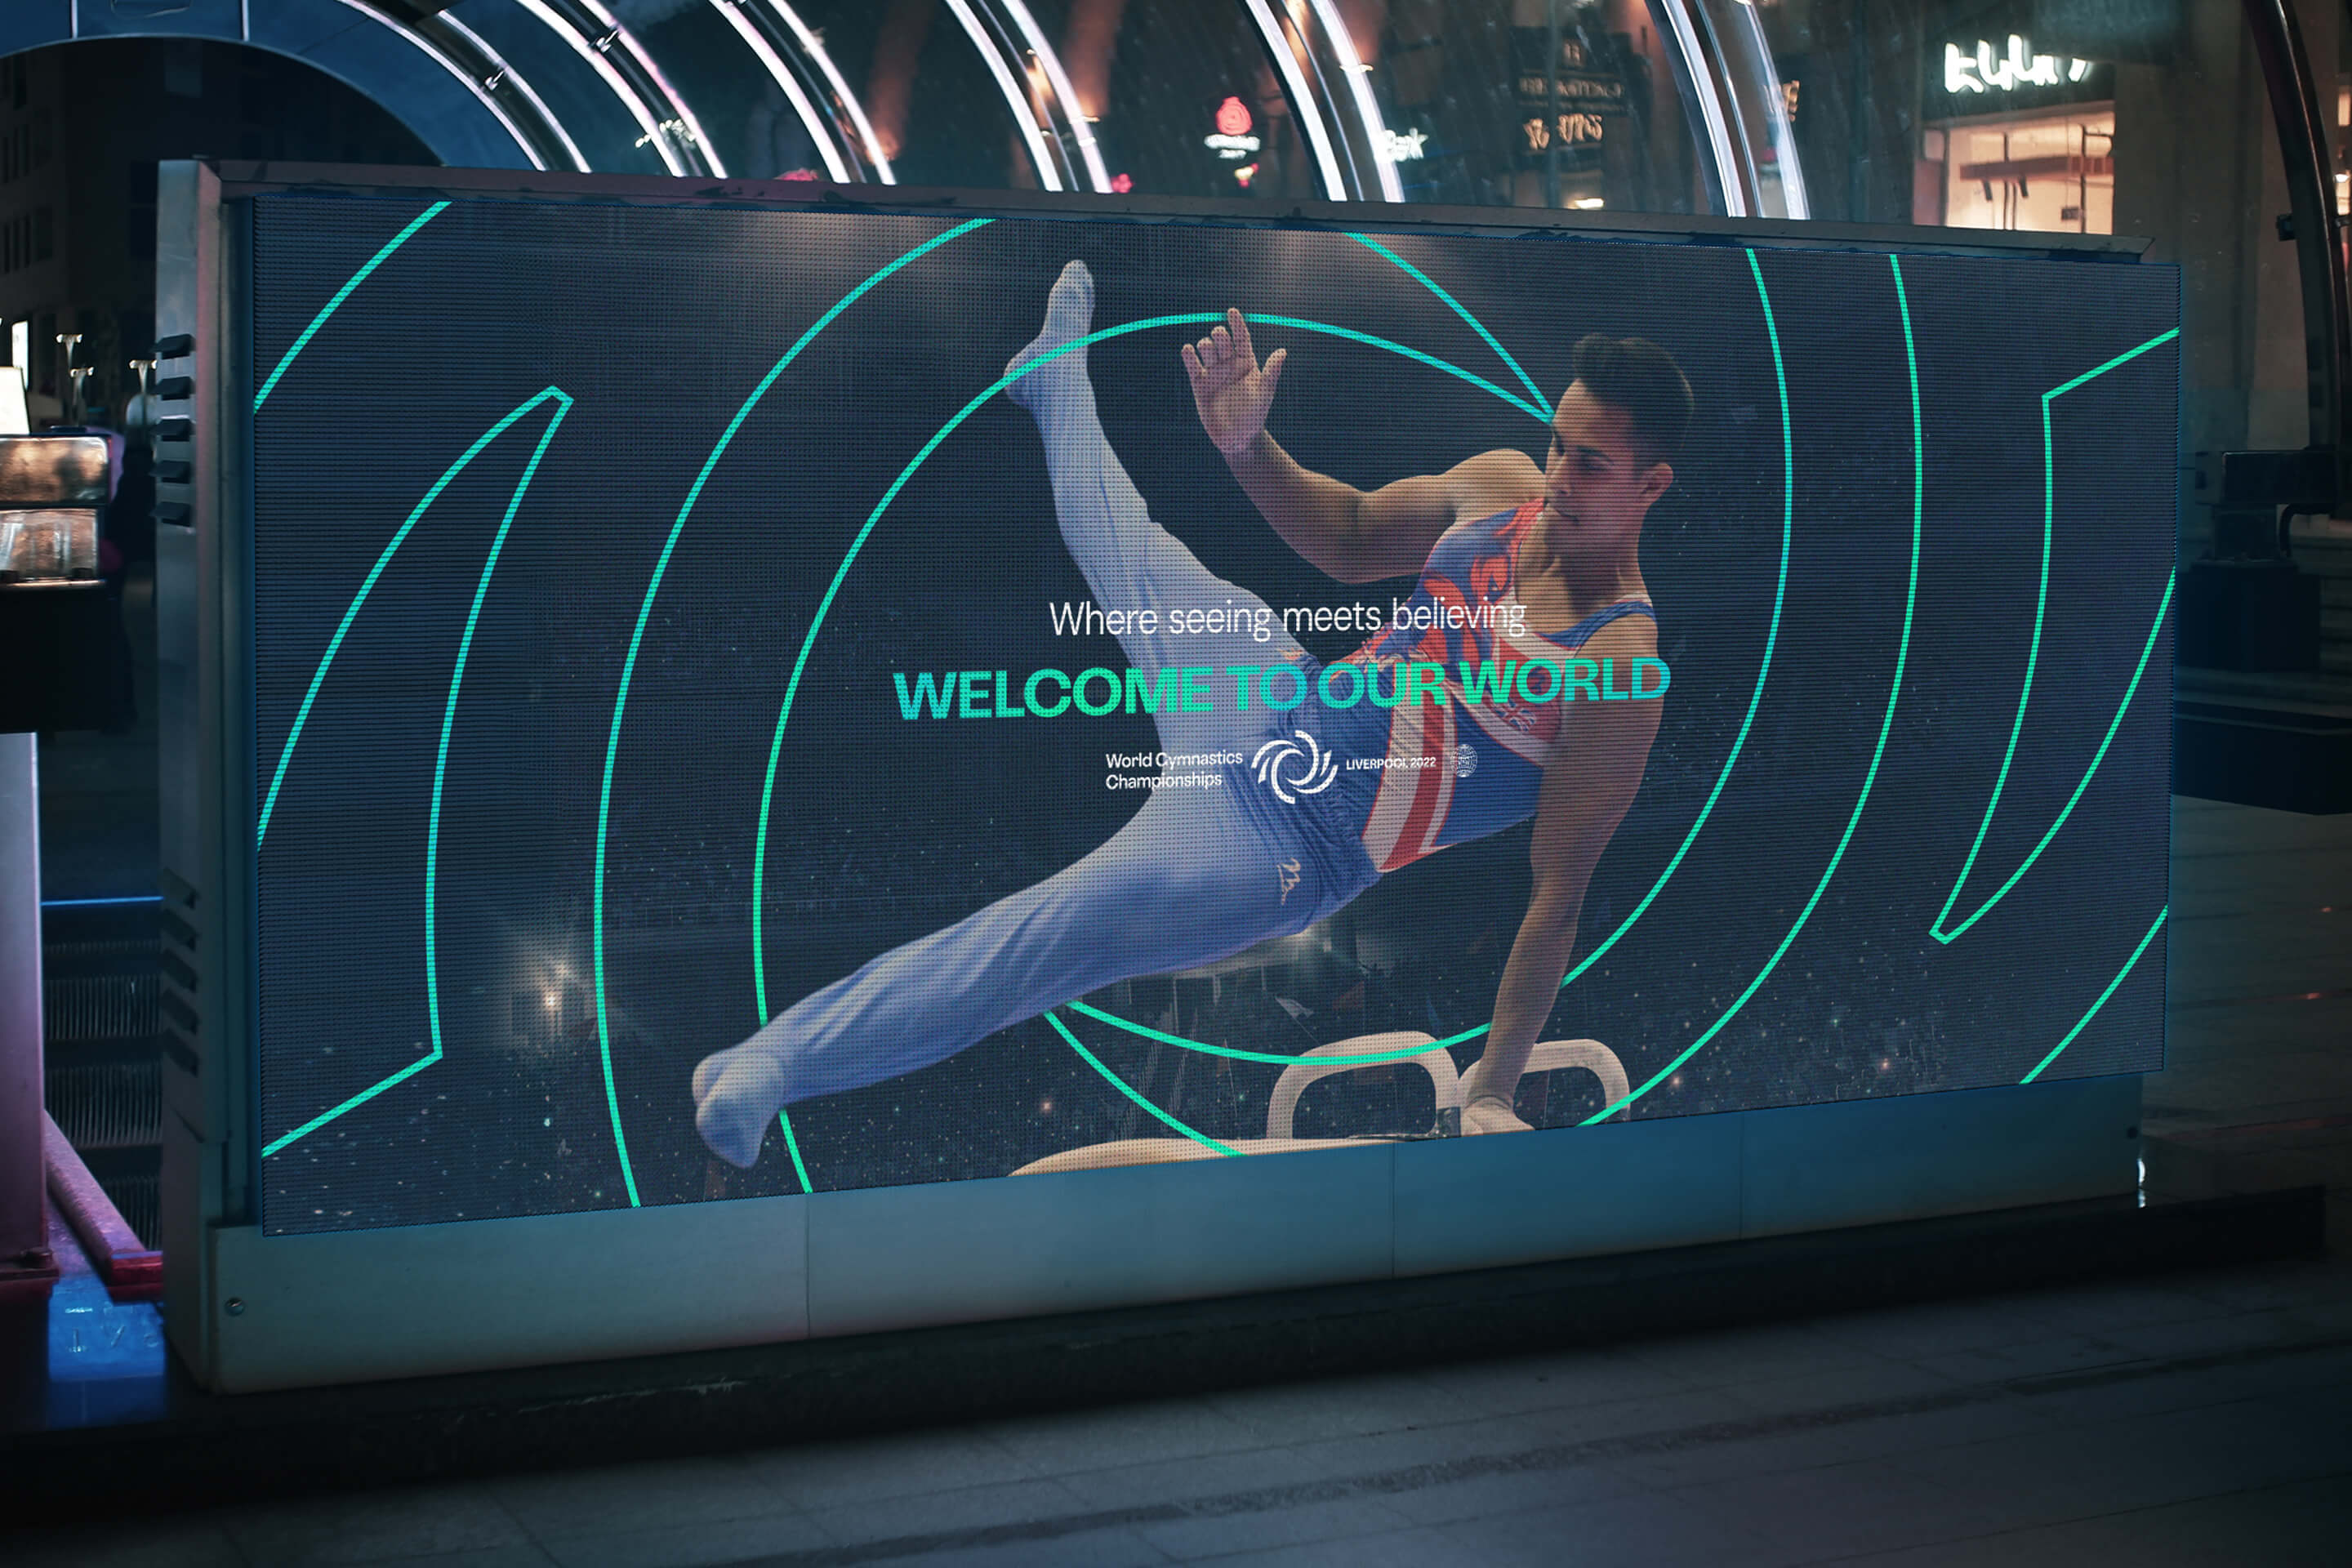 World Gymnastics Championships 2022 - Welcome to our World OOH